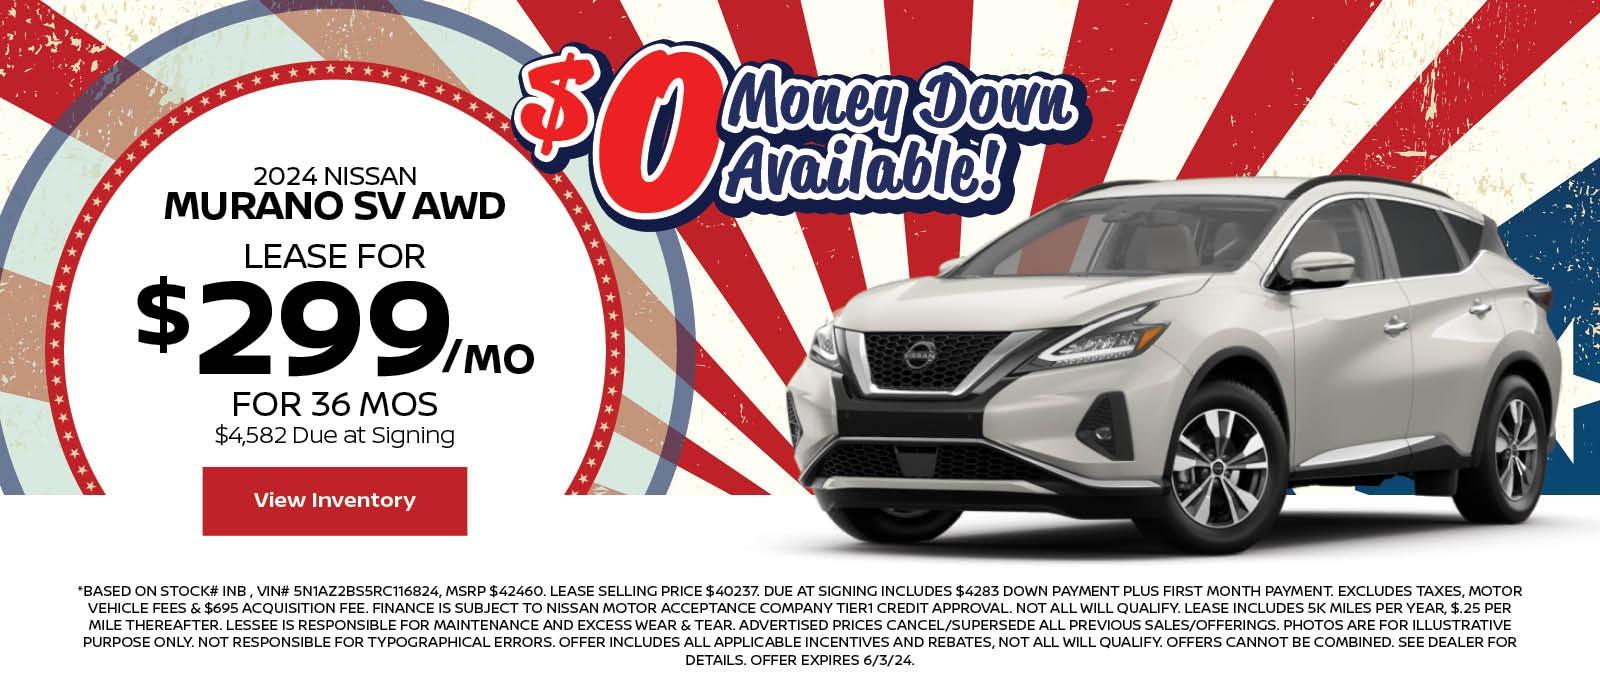 Nissan Murano Lease Special